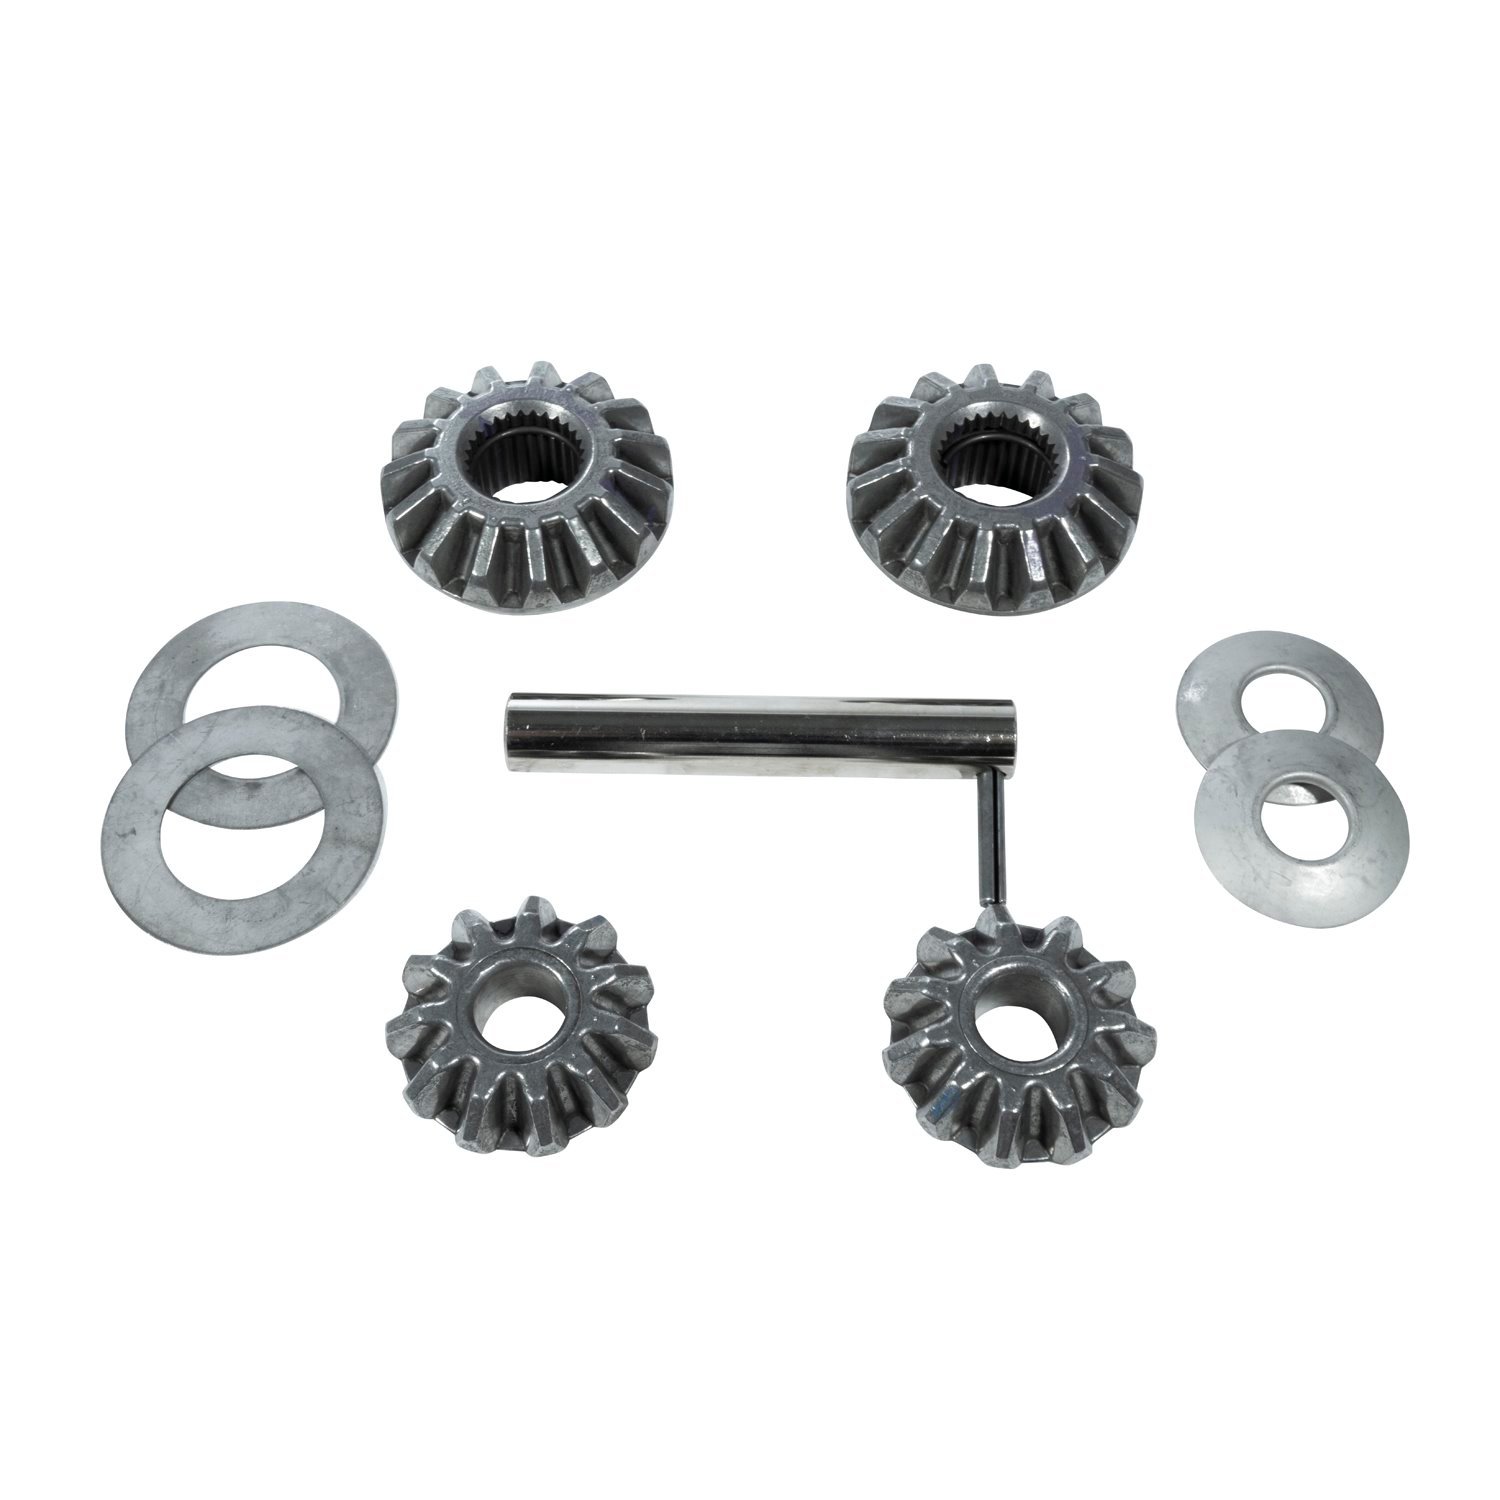 Standard Open Spider Gear Kit For 8.25 in. GM Ifs (Awd & 4Wd Models)